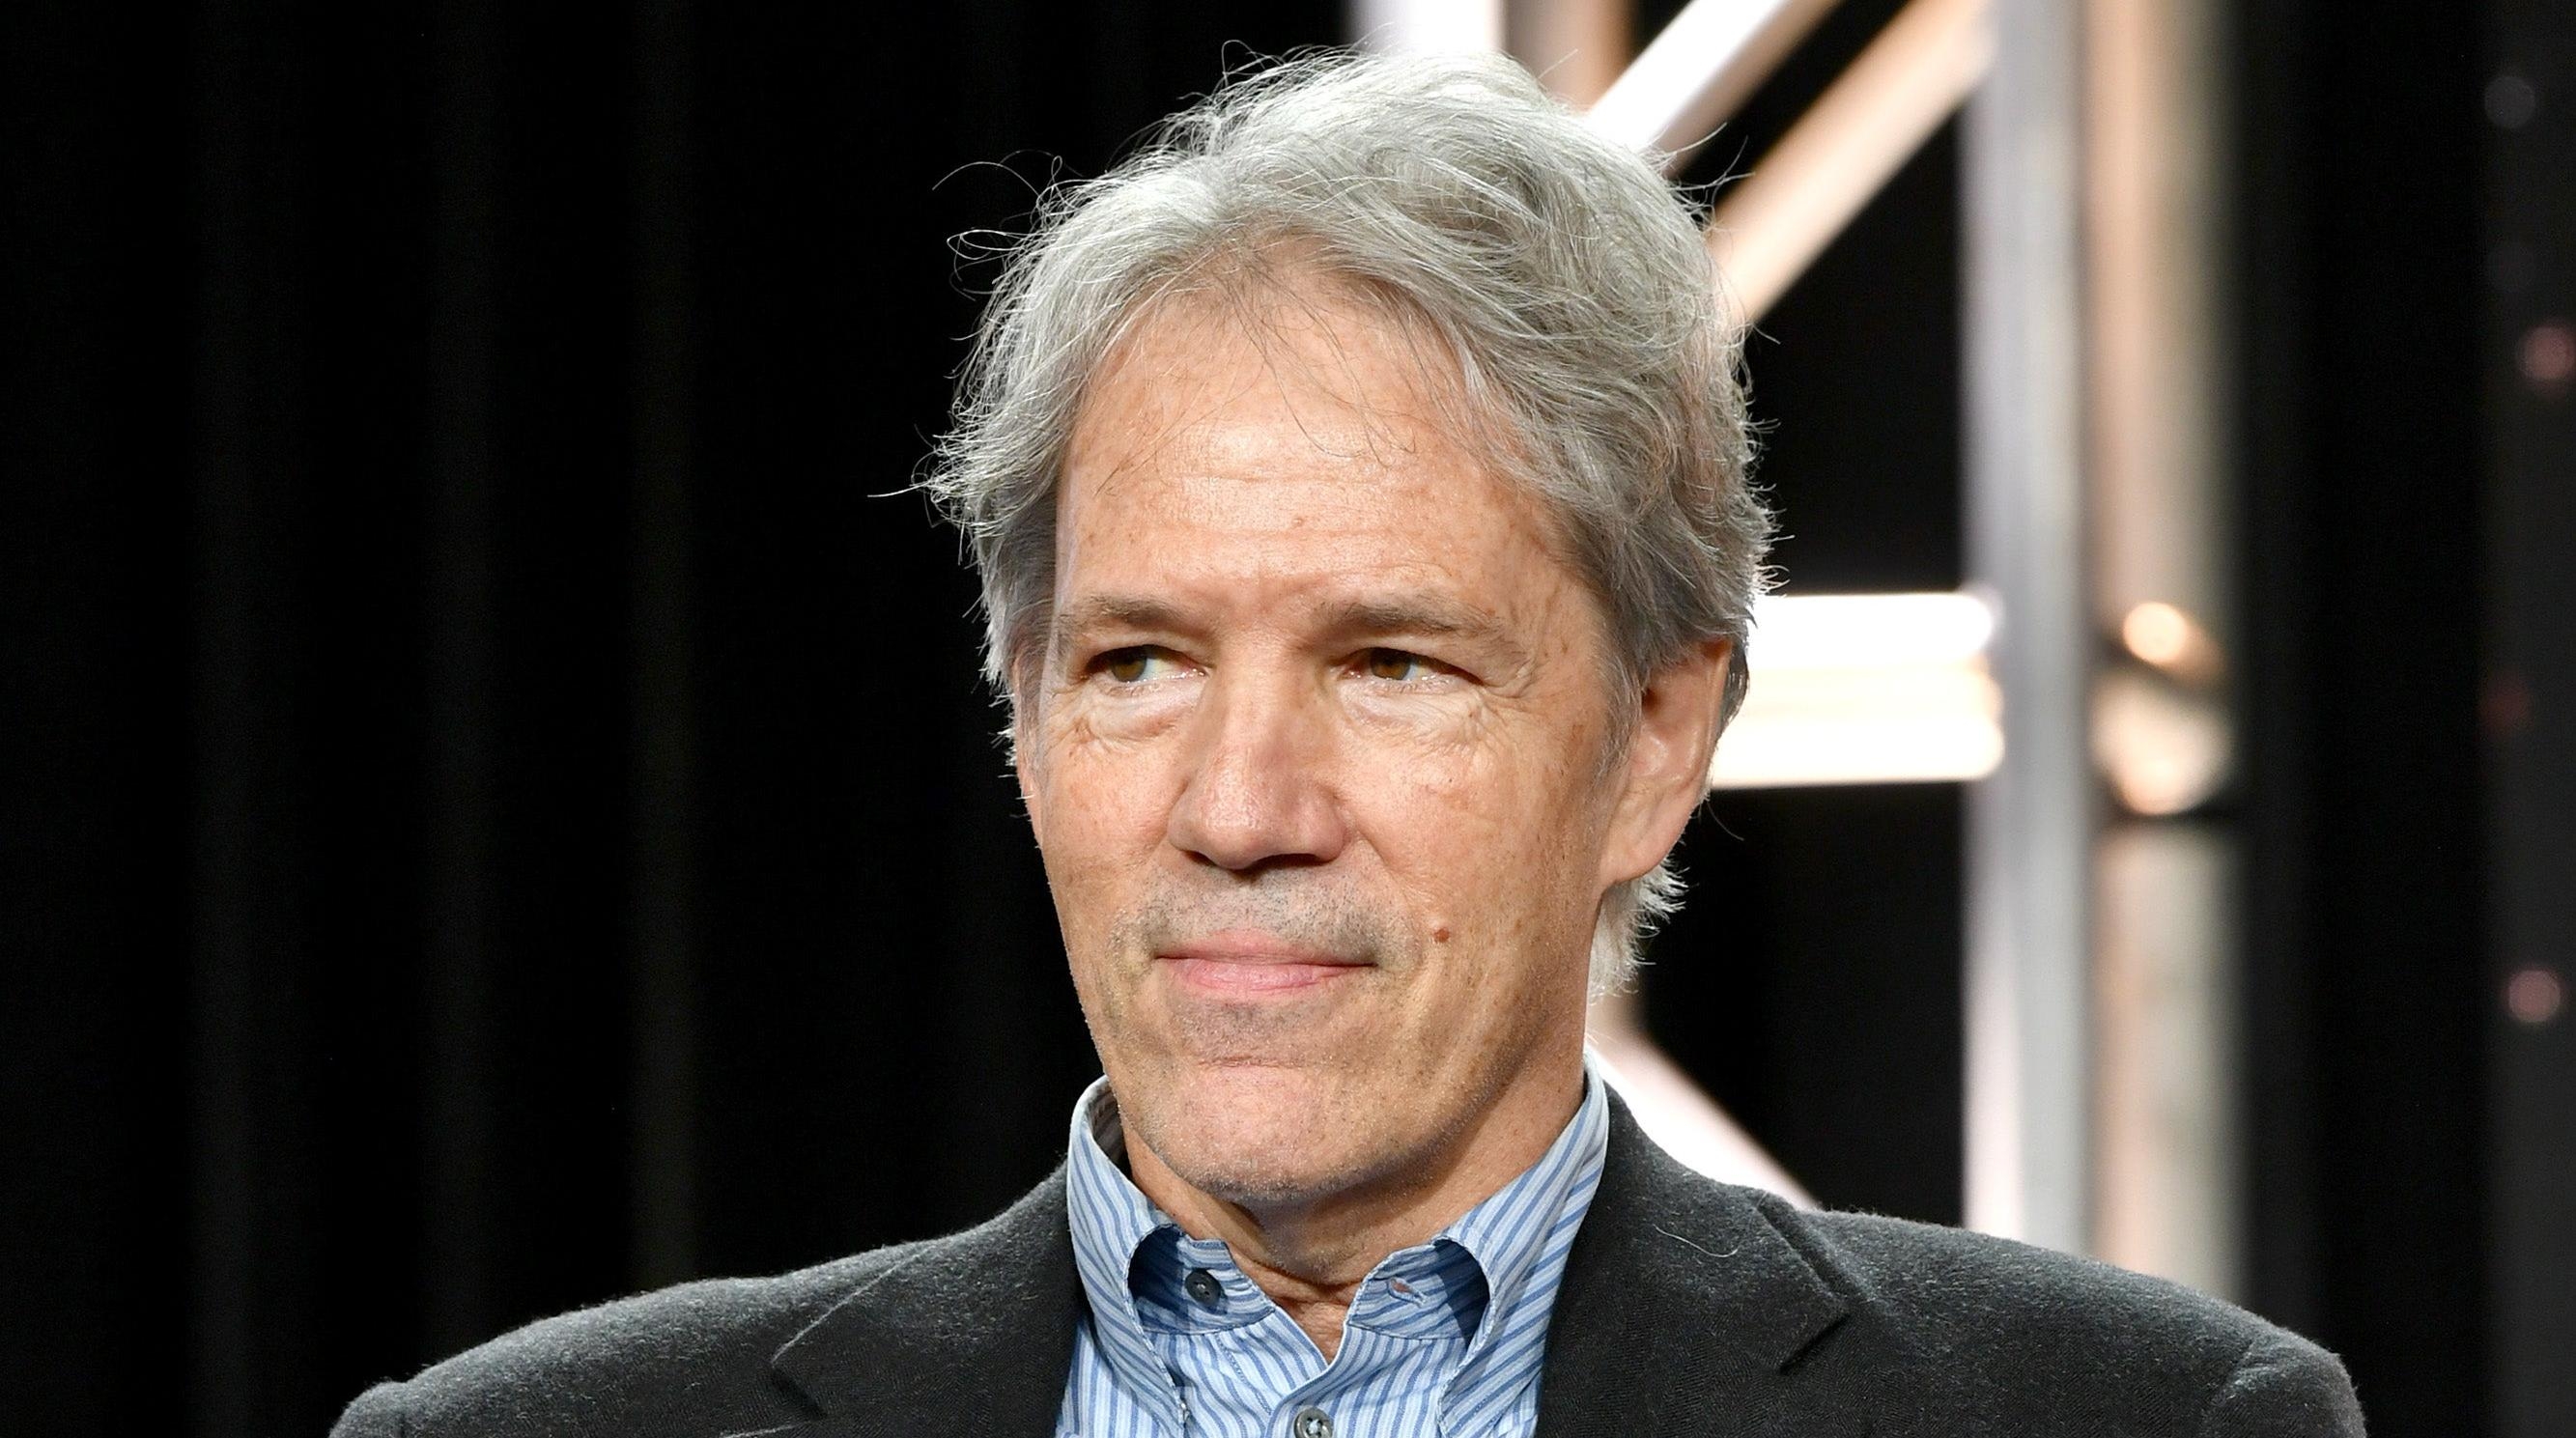 David E. Kelley’s relentless grip on dramatic miniseries continues with Apple TV Plus’ Presumed Innocent